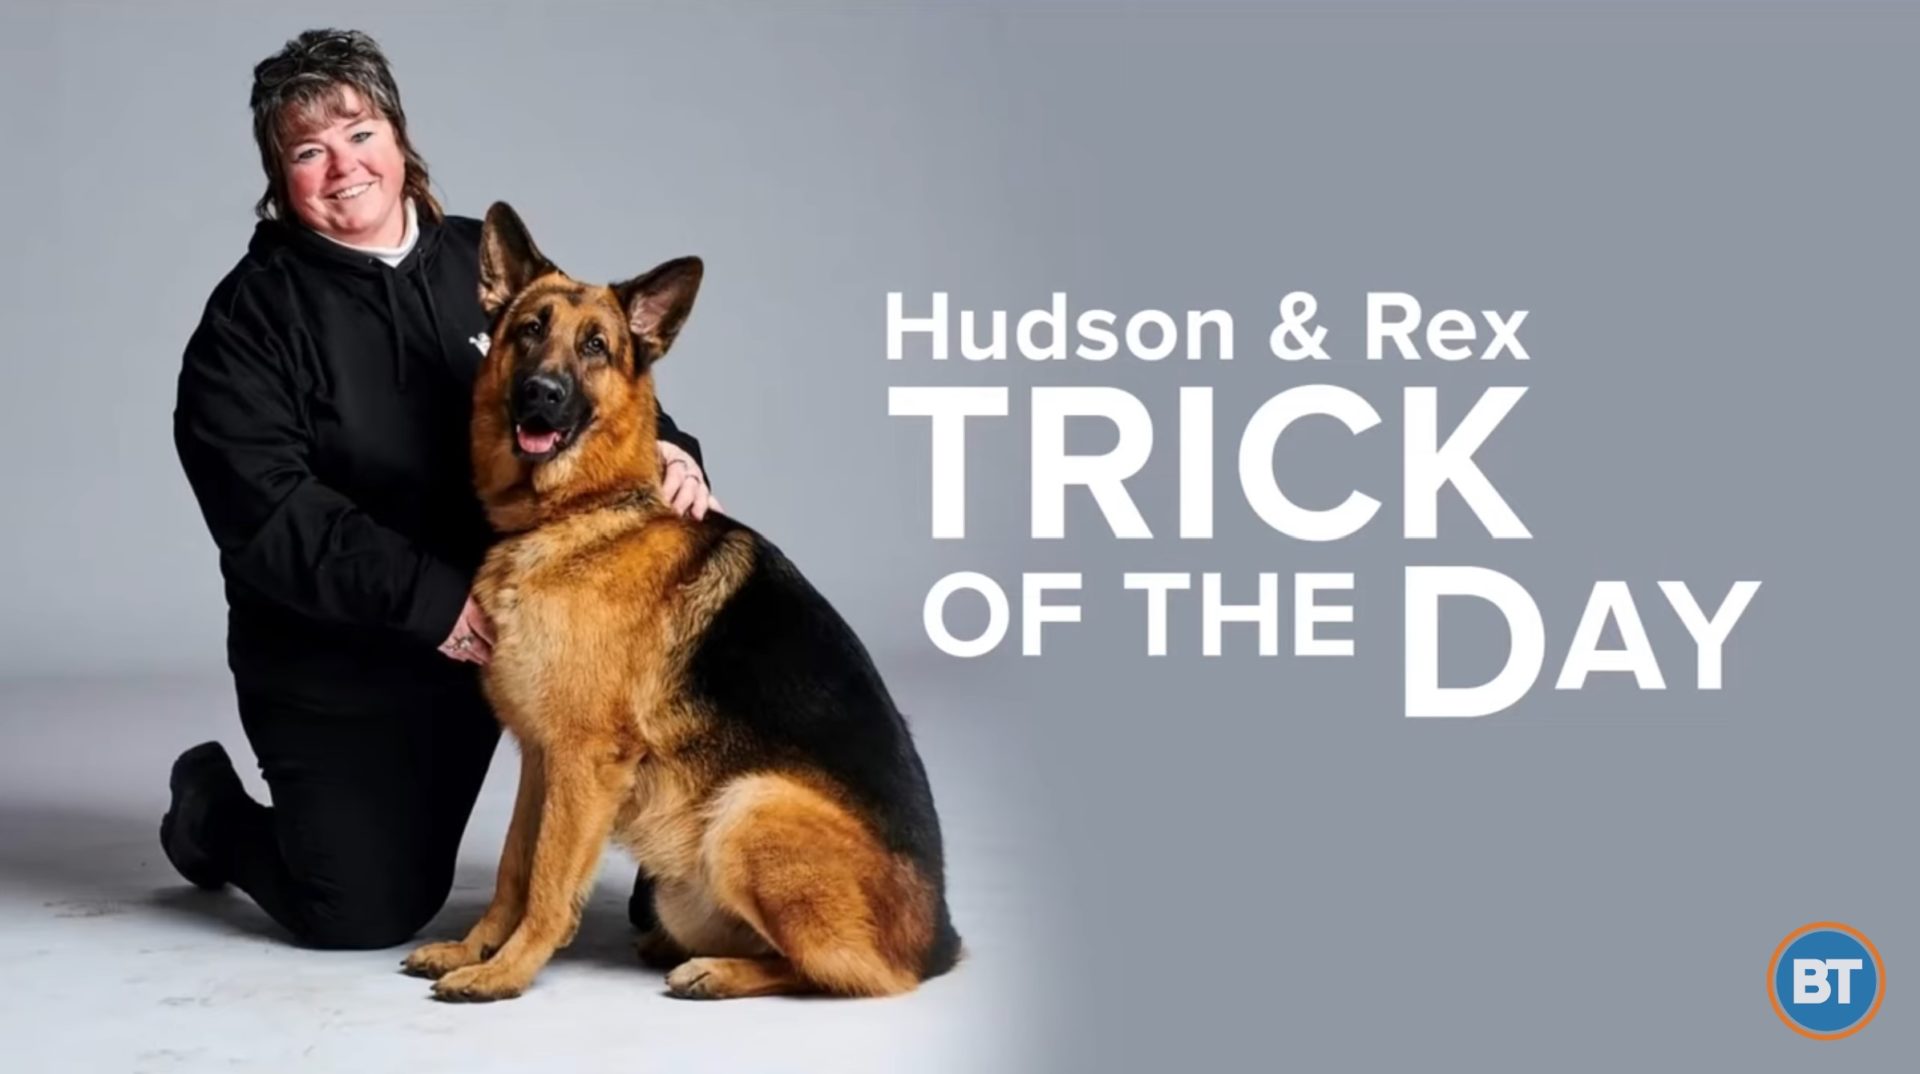 [From Breakfast Television] Yes, you can teach your dog a new trick! Hudson & Rex star canine